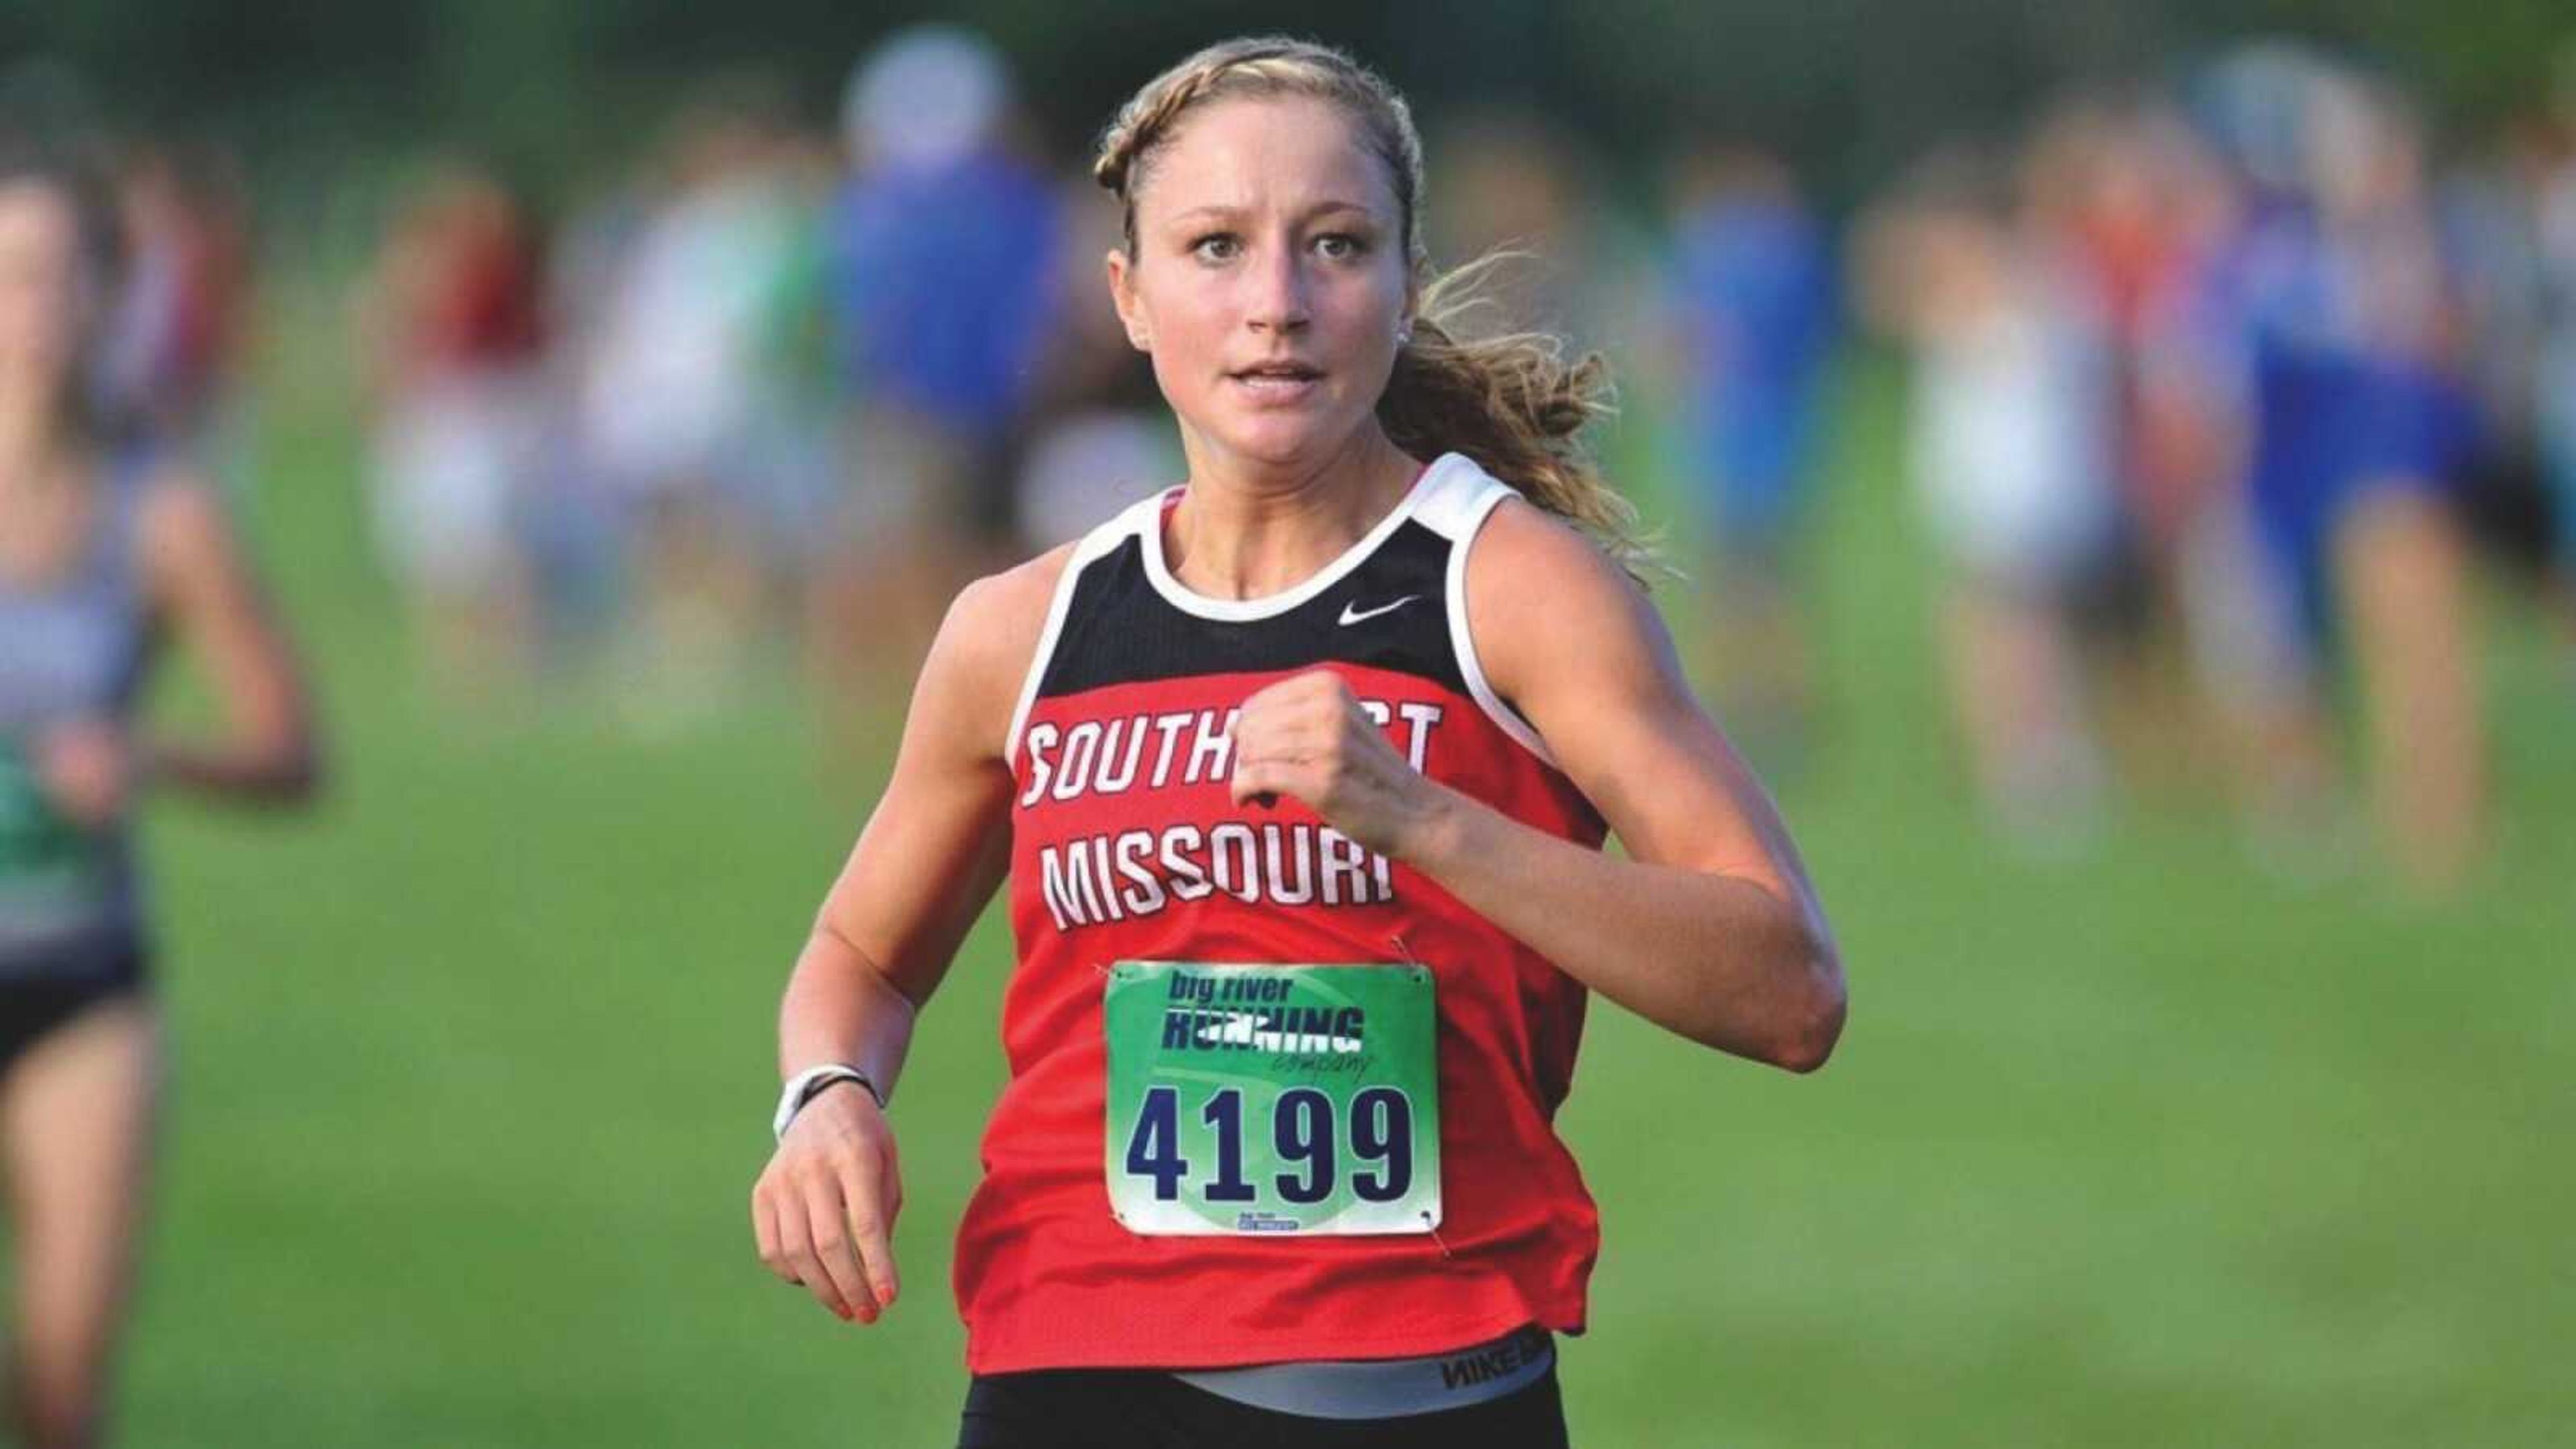 The Redhawks Cross Country teams will have their first meet, the Gabby Reuveni Early Bird at Washington University in St. Louis on Sept. 5.